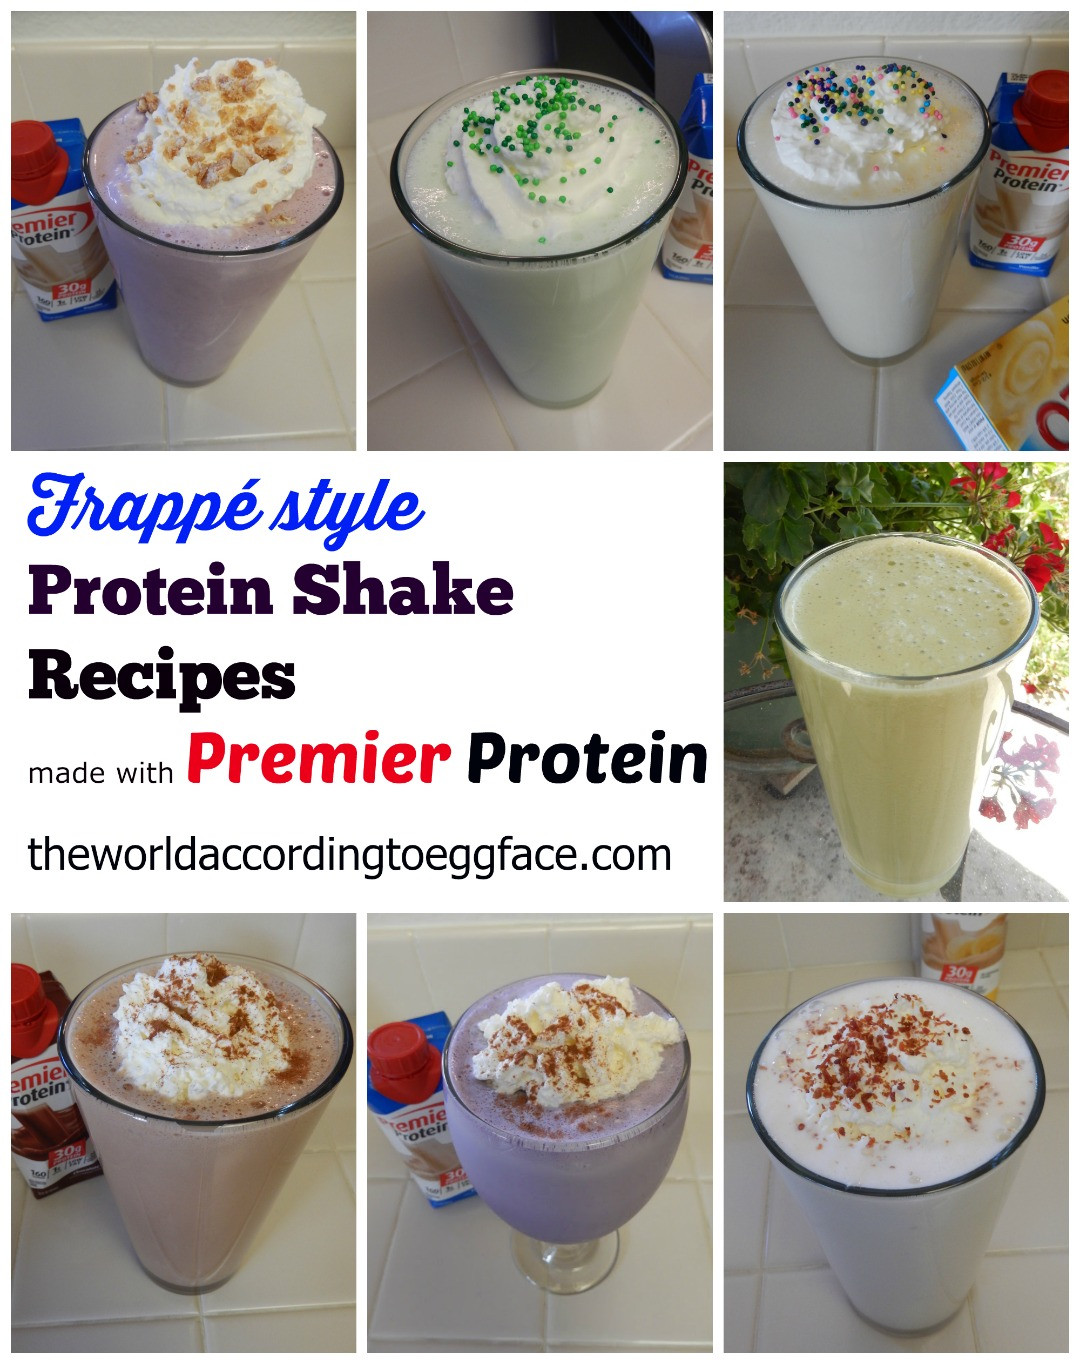 Bariatric Recipes Gastric Bypass High Protein Weight Loss Surgery
 theworldaccordingtoeggface Premier Protein Shakes 5